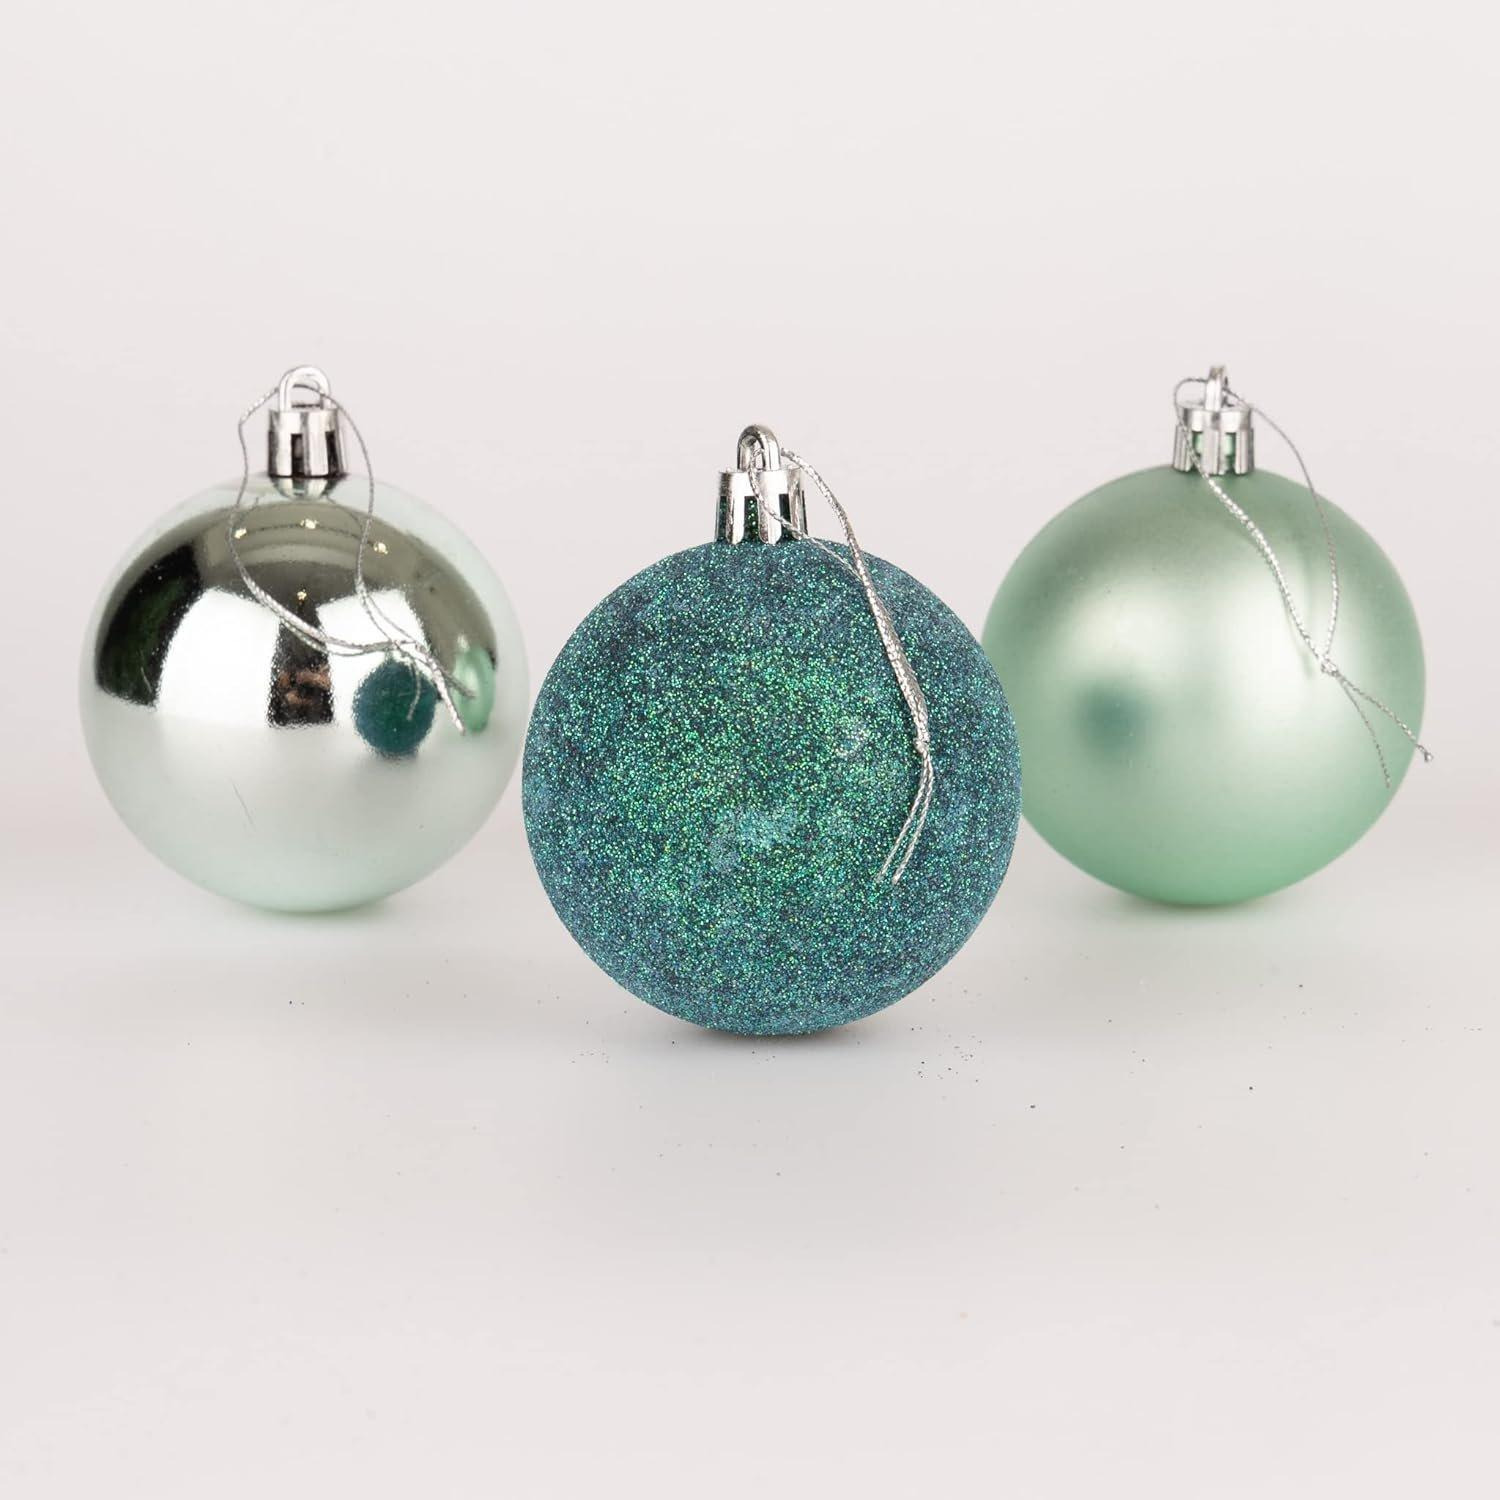 60mm/18Pcs Christmas Baubles Shatterproof Turquoise,Tree Decorations - image 1